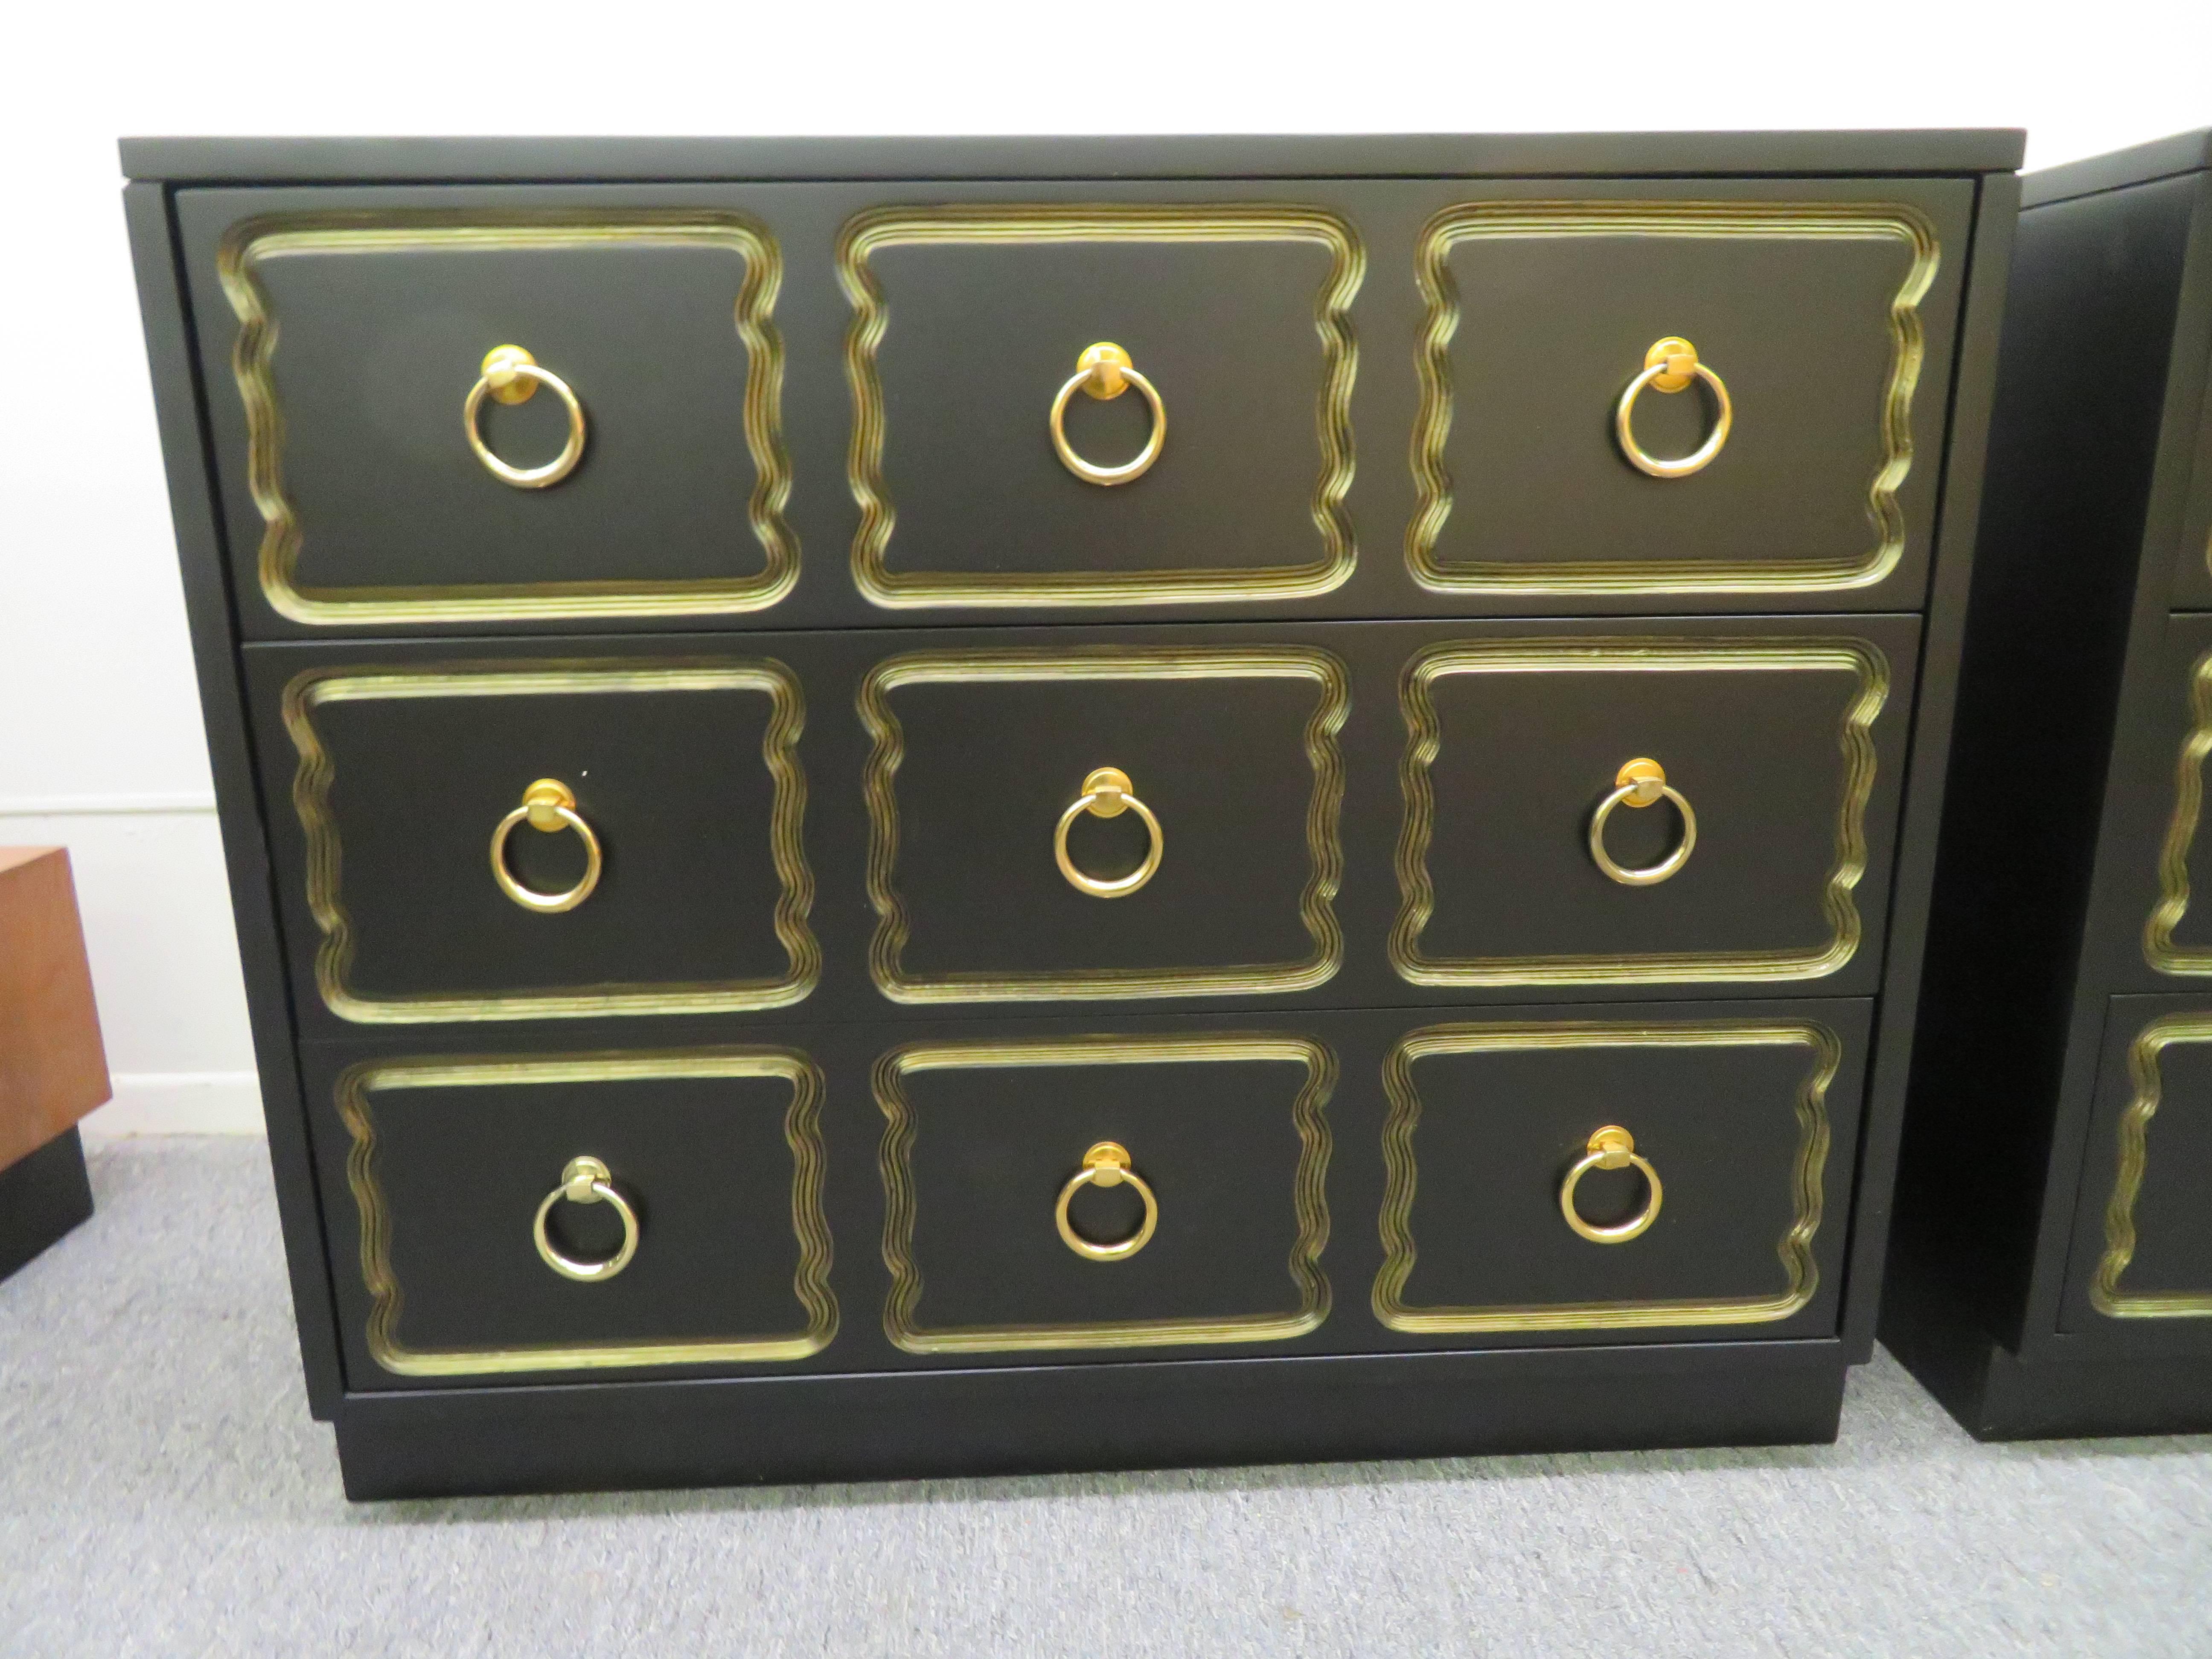 Pair of Dorothy Draper Espana rectangular chests with new black lacquer finish, features three drawers decorated with a repeated routed pattern. Large brass ring pulls adorn the centres of the nine wavy gold rimmed shapes. The low lustre black